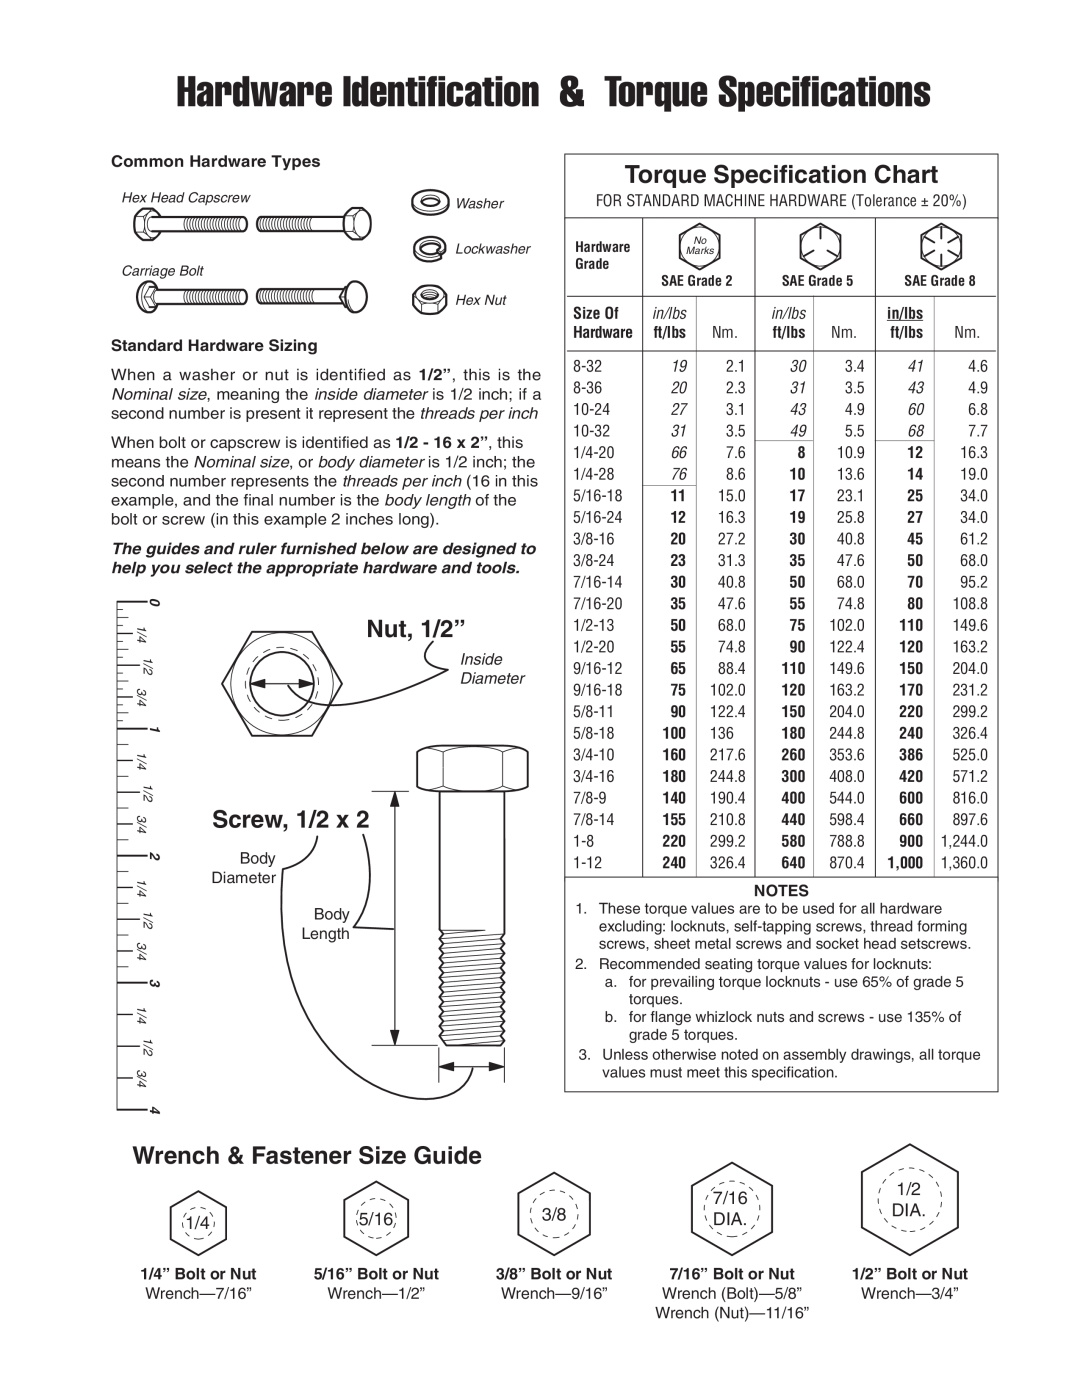 Snapper 1726564 manual Torque Specification Chart, Hardware Identification & Torque Specifications, Nut, 1/2”, Screw, 1/2 x 